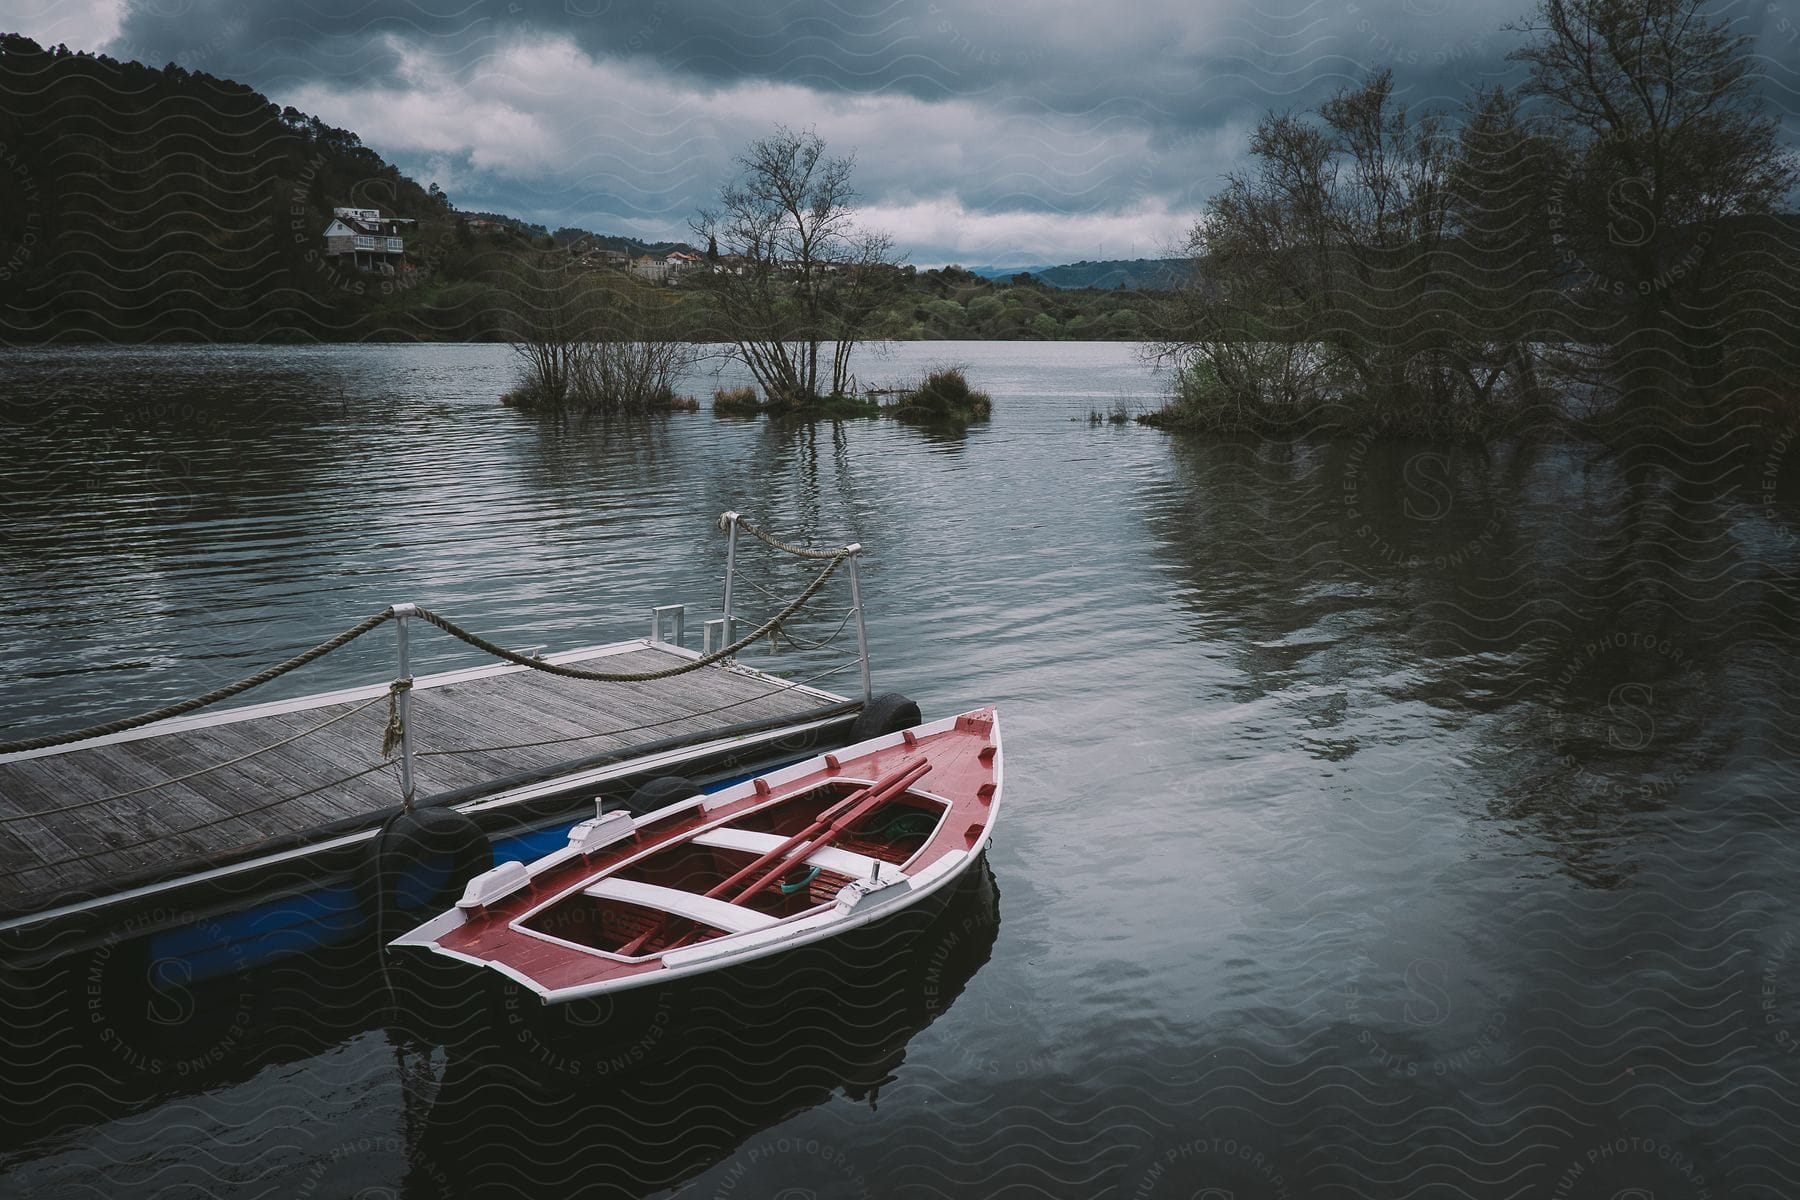 A red and white canoe is tied to a wooden dock on a lake on a dark, cloudy day.